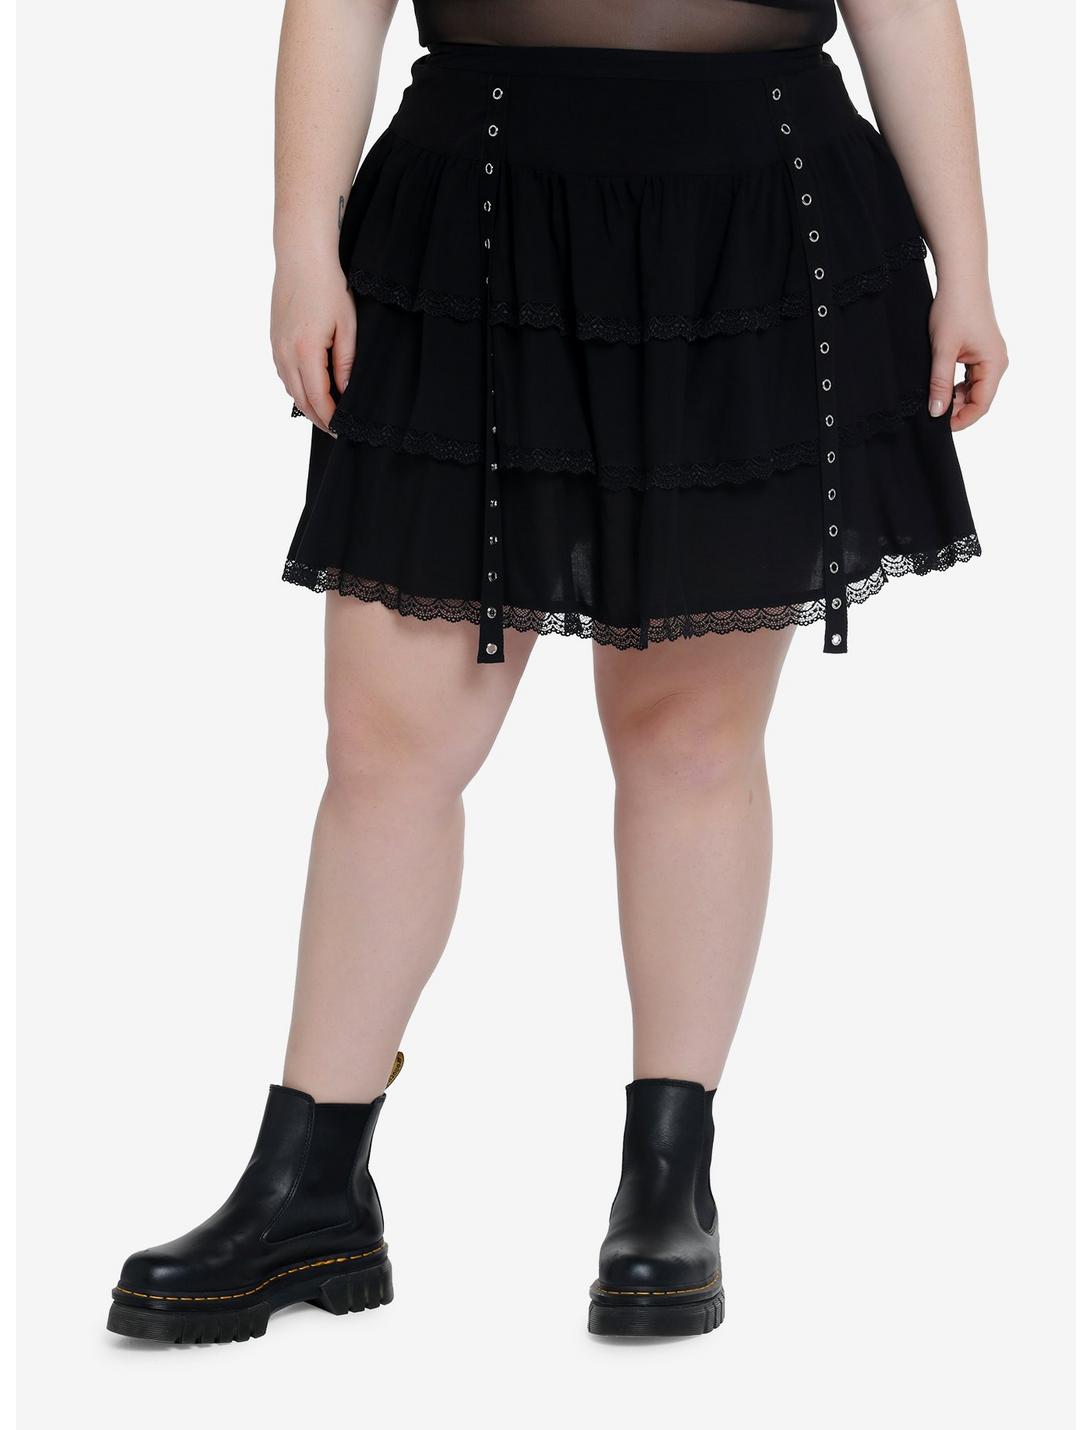 Thorn & Fable Black Lace Grommet Tiered Skirt Plus Size, BLACK, hi-res